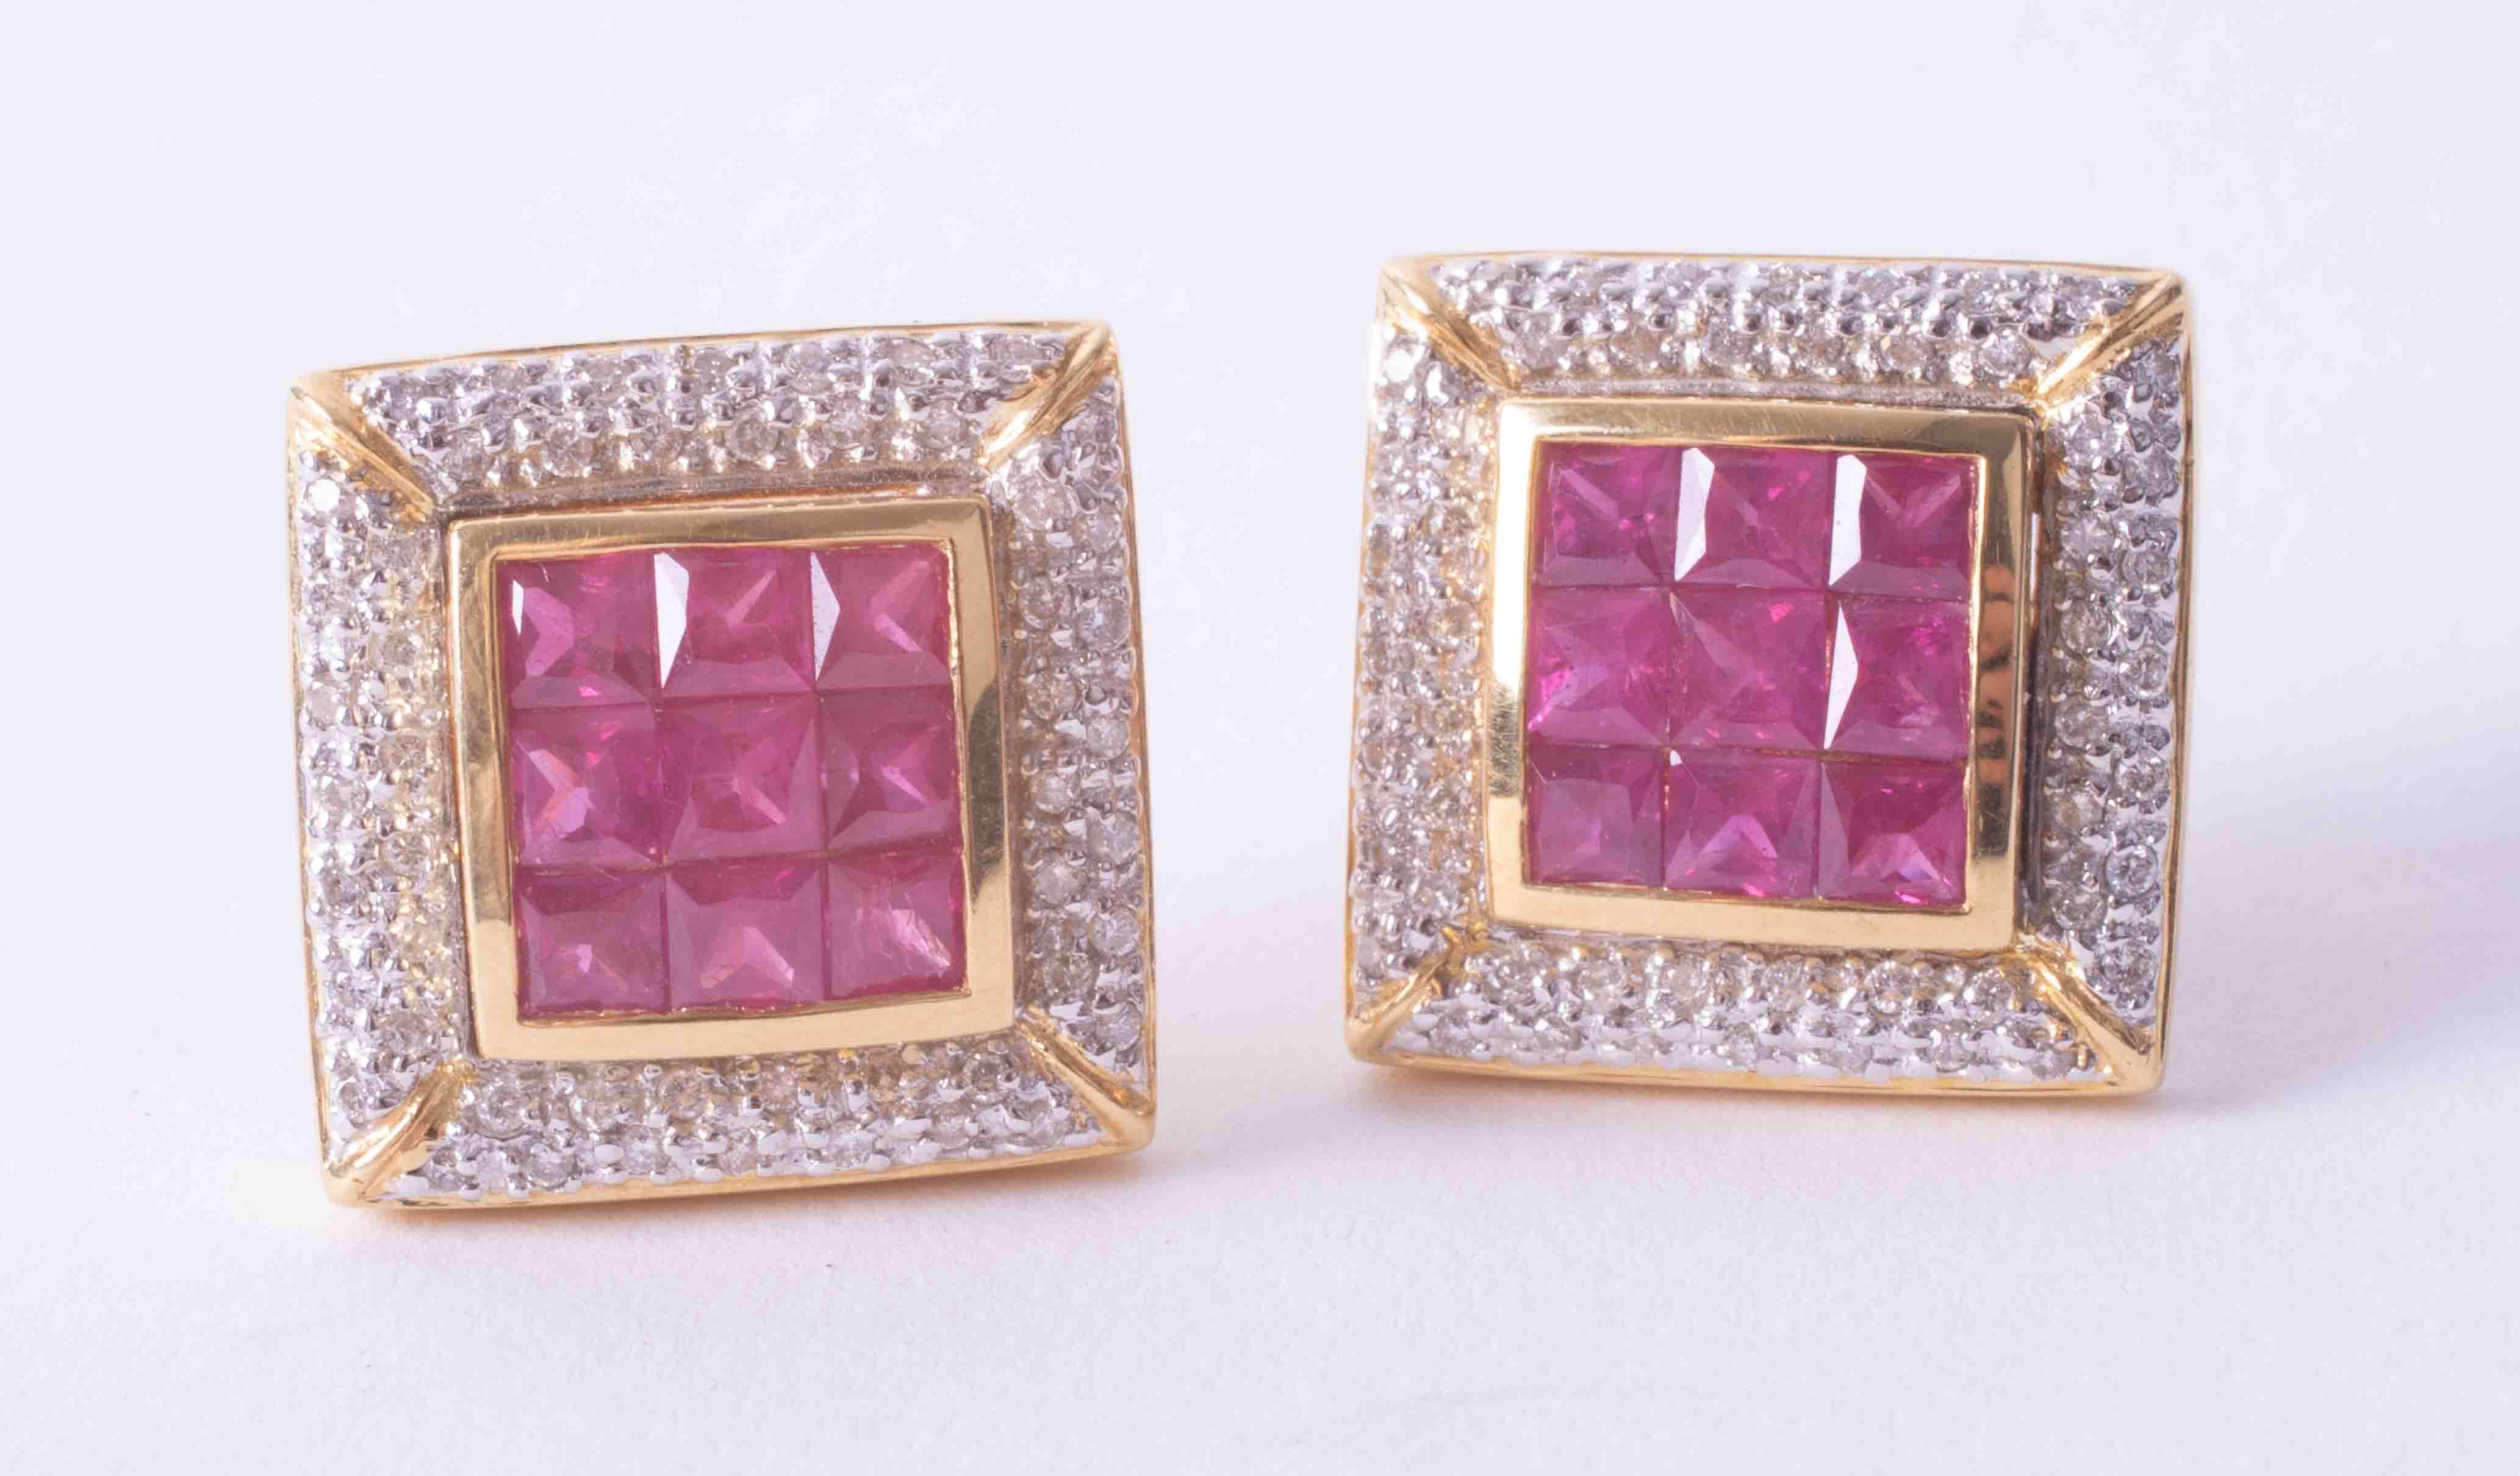 A pair of impressive 18ct yellow gold large square earrings set princess cut rubies and surrounded